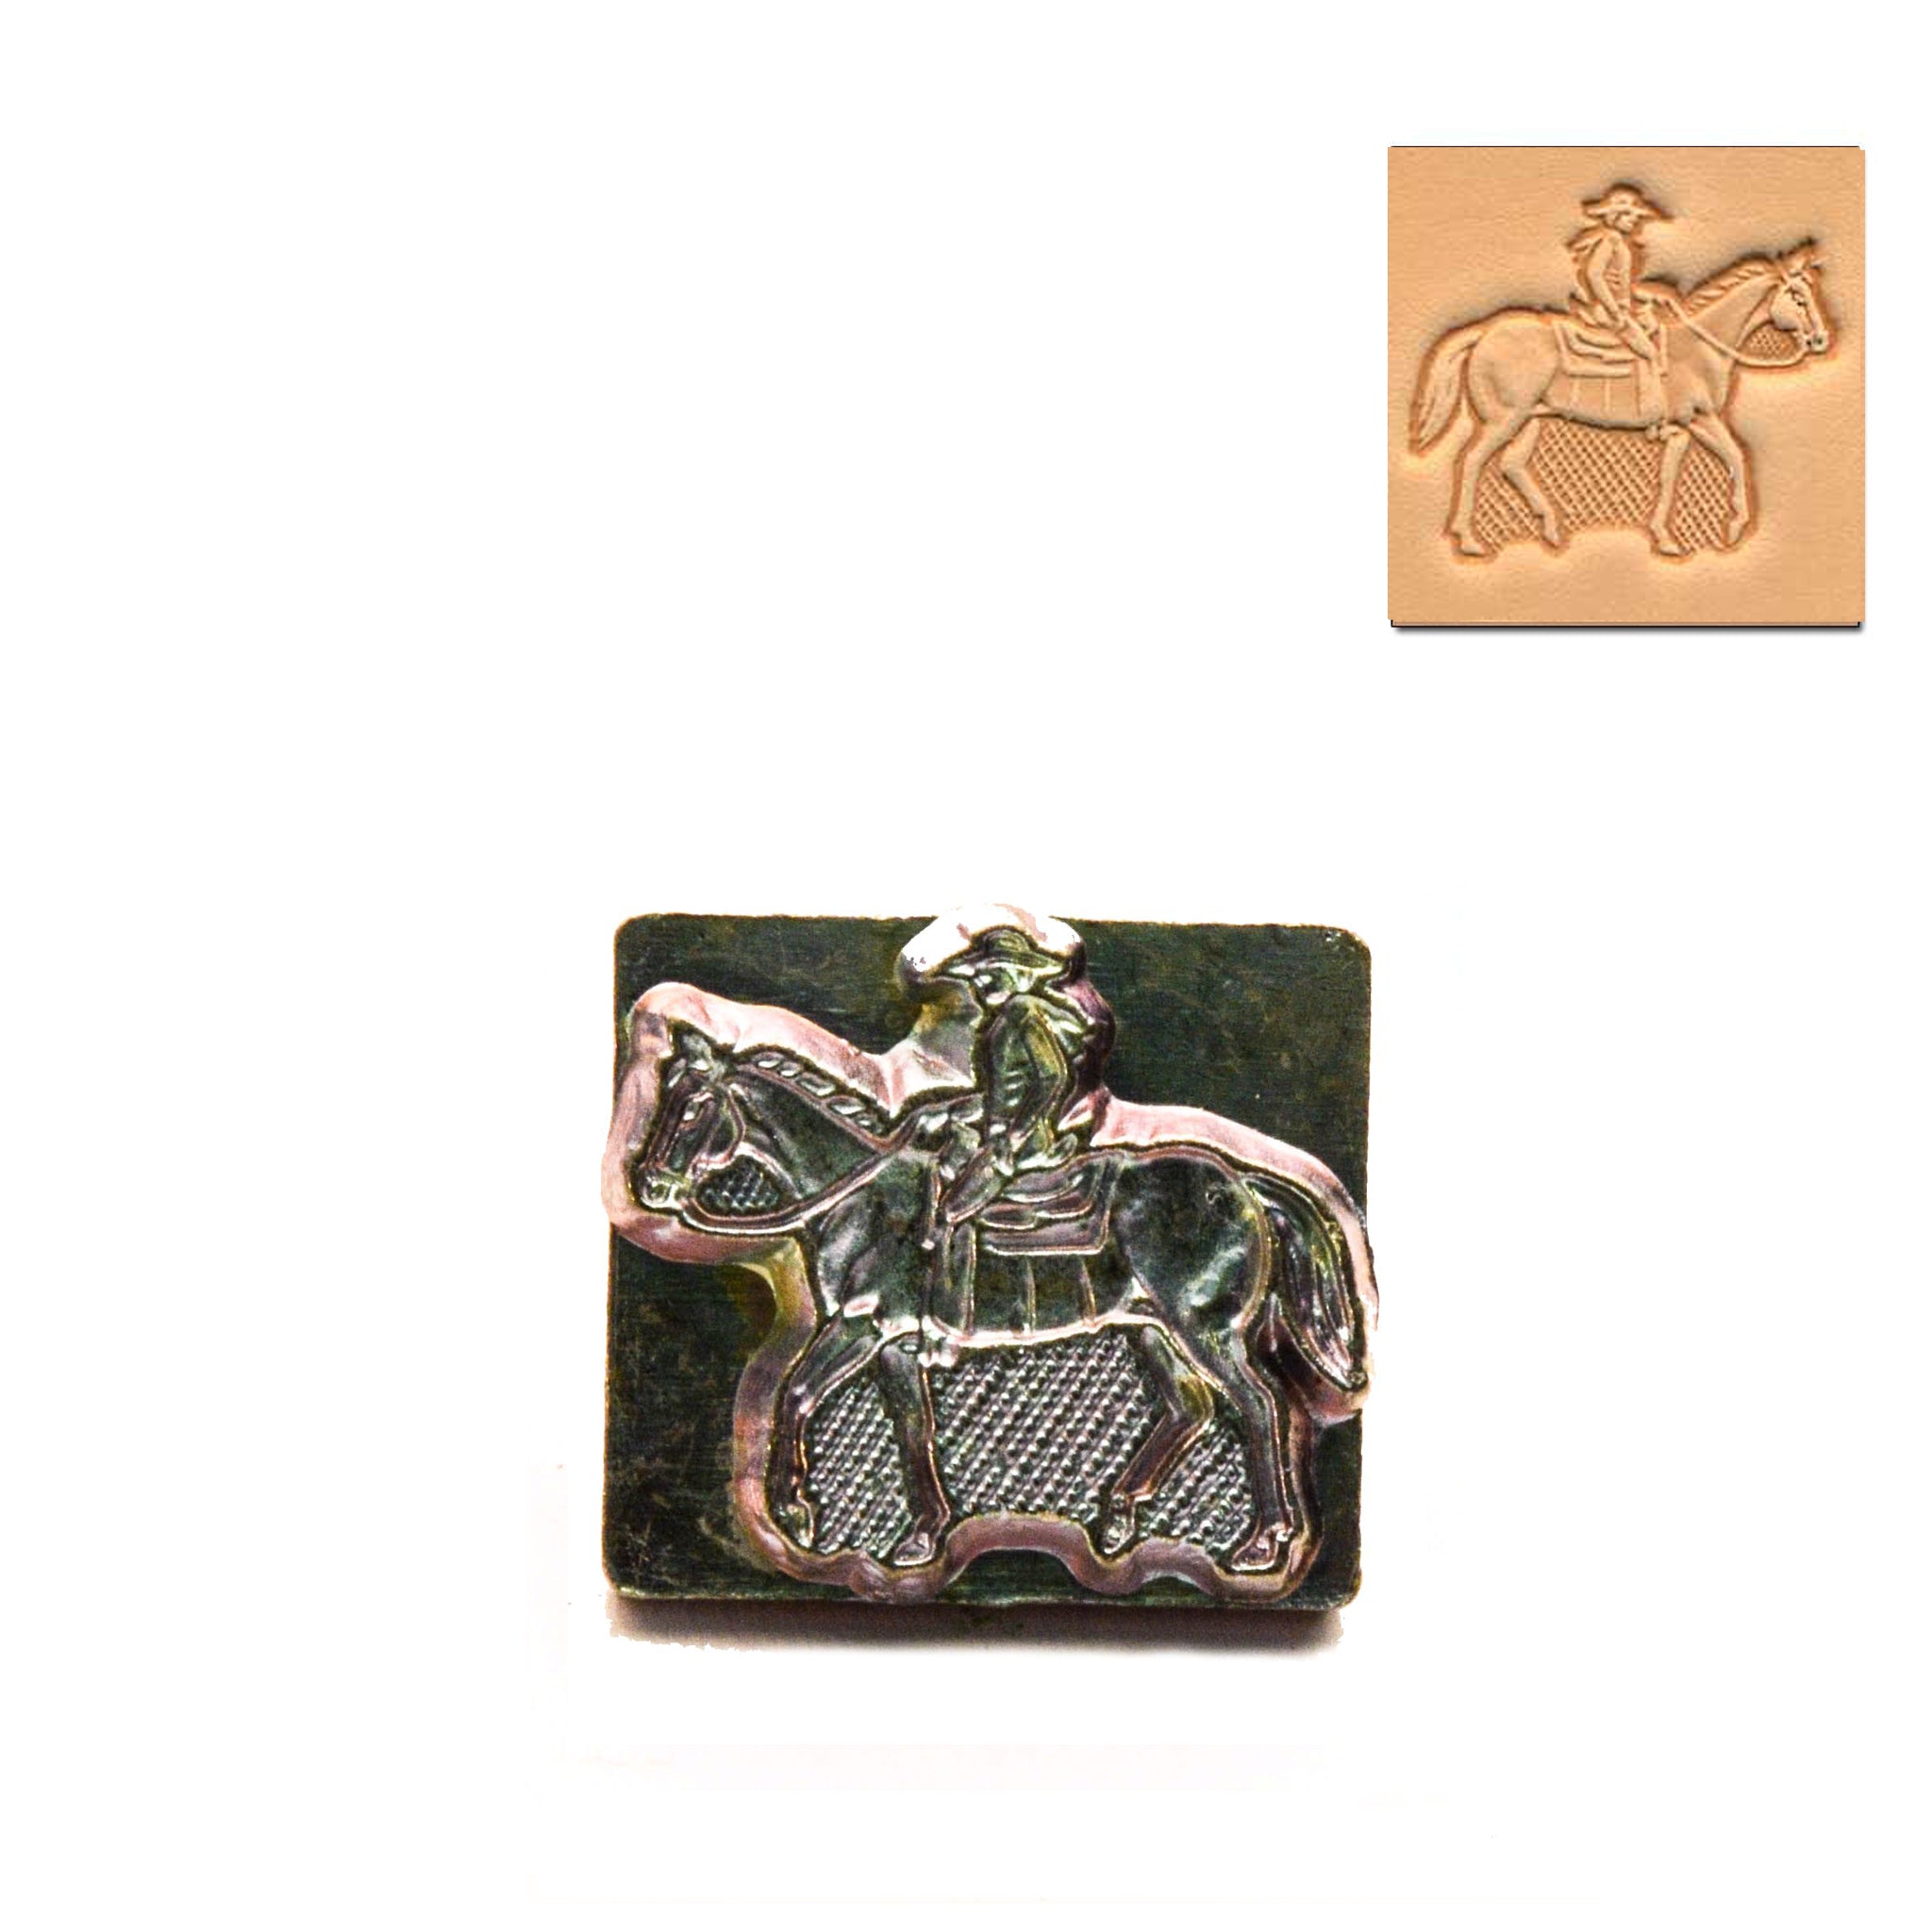 Horse & Rider 3D Embossing Stamp from Identity Leathercraft